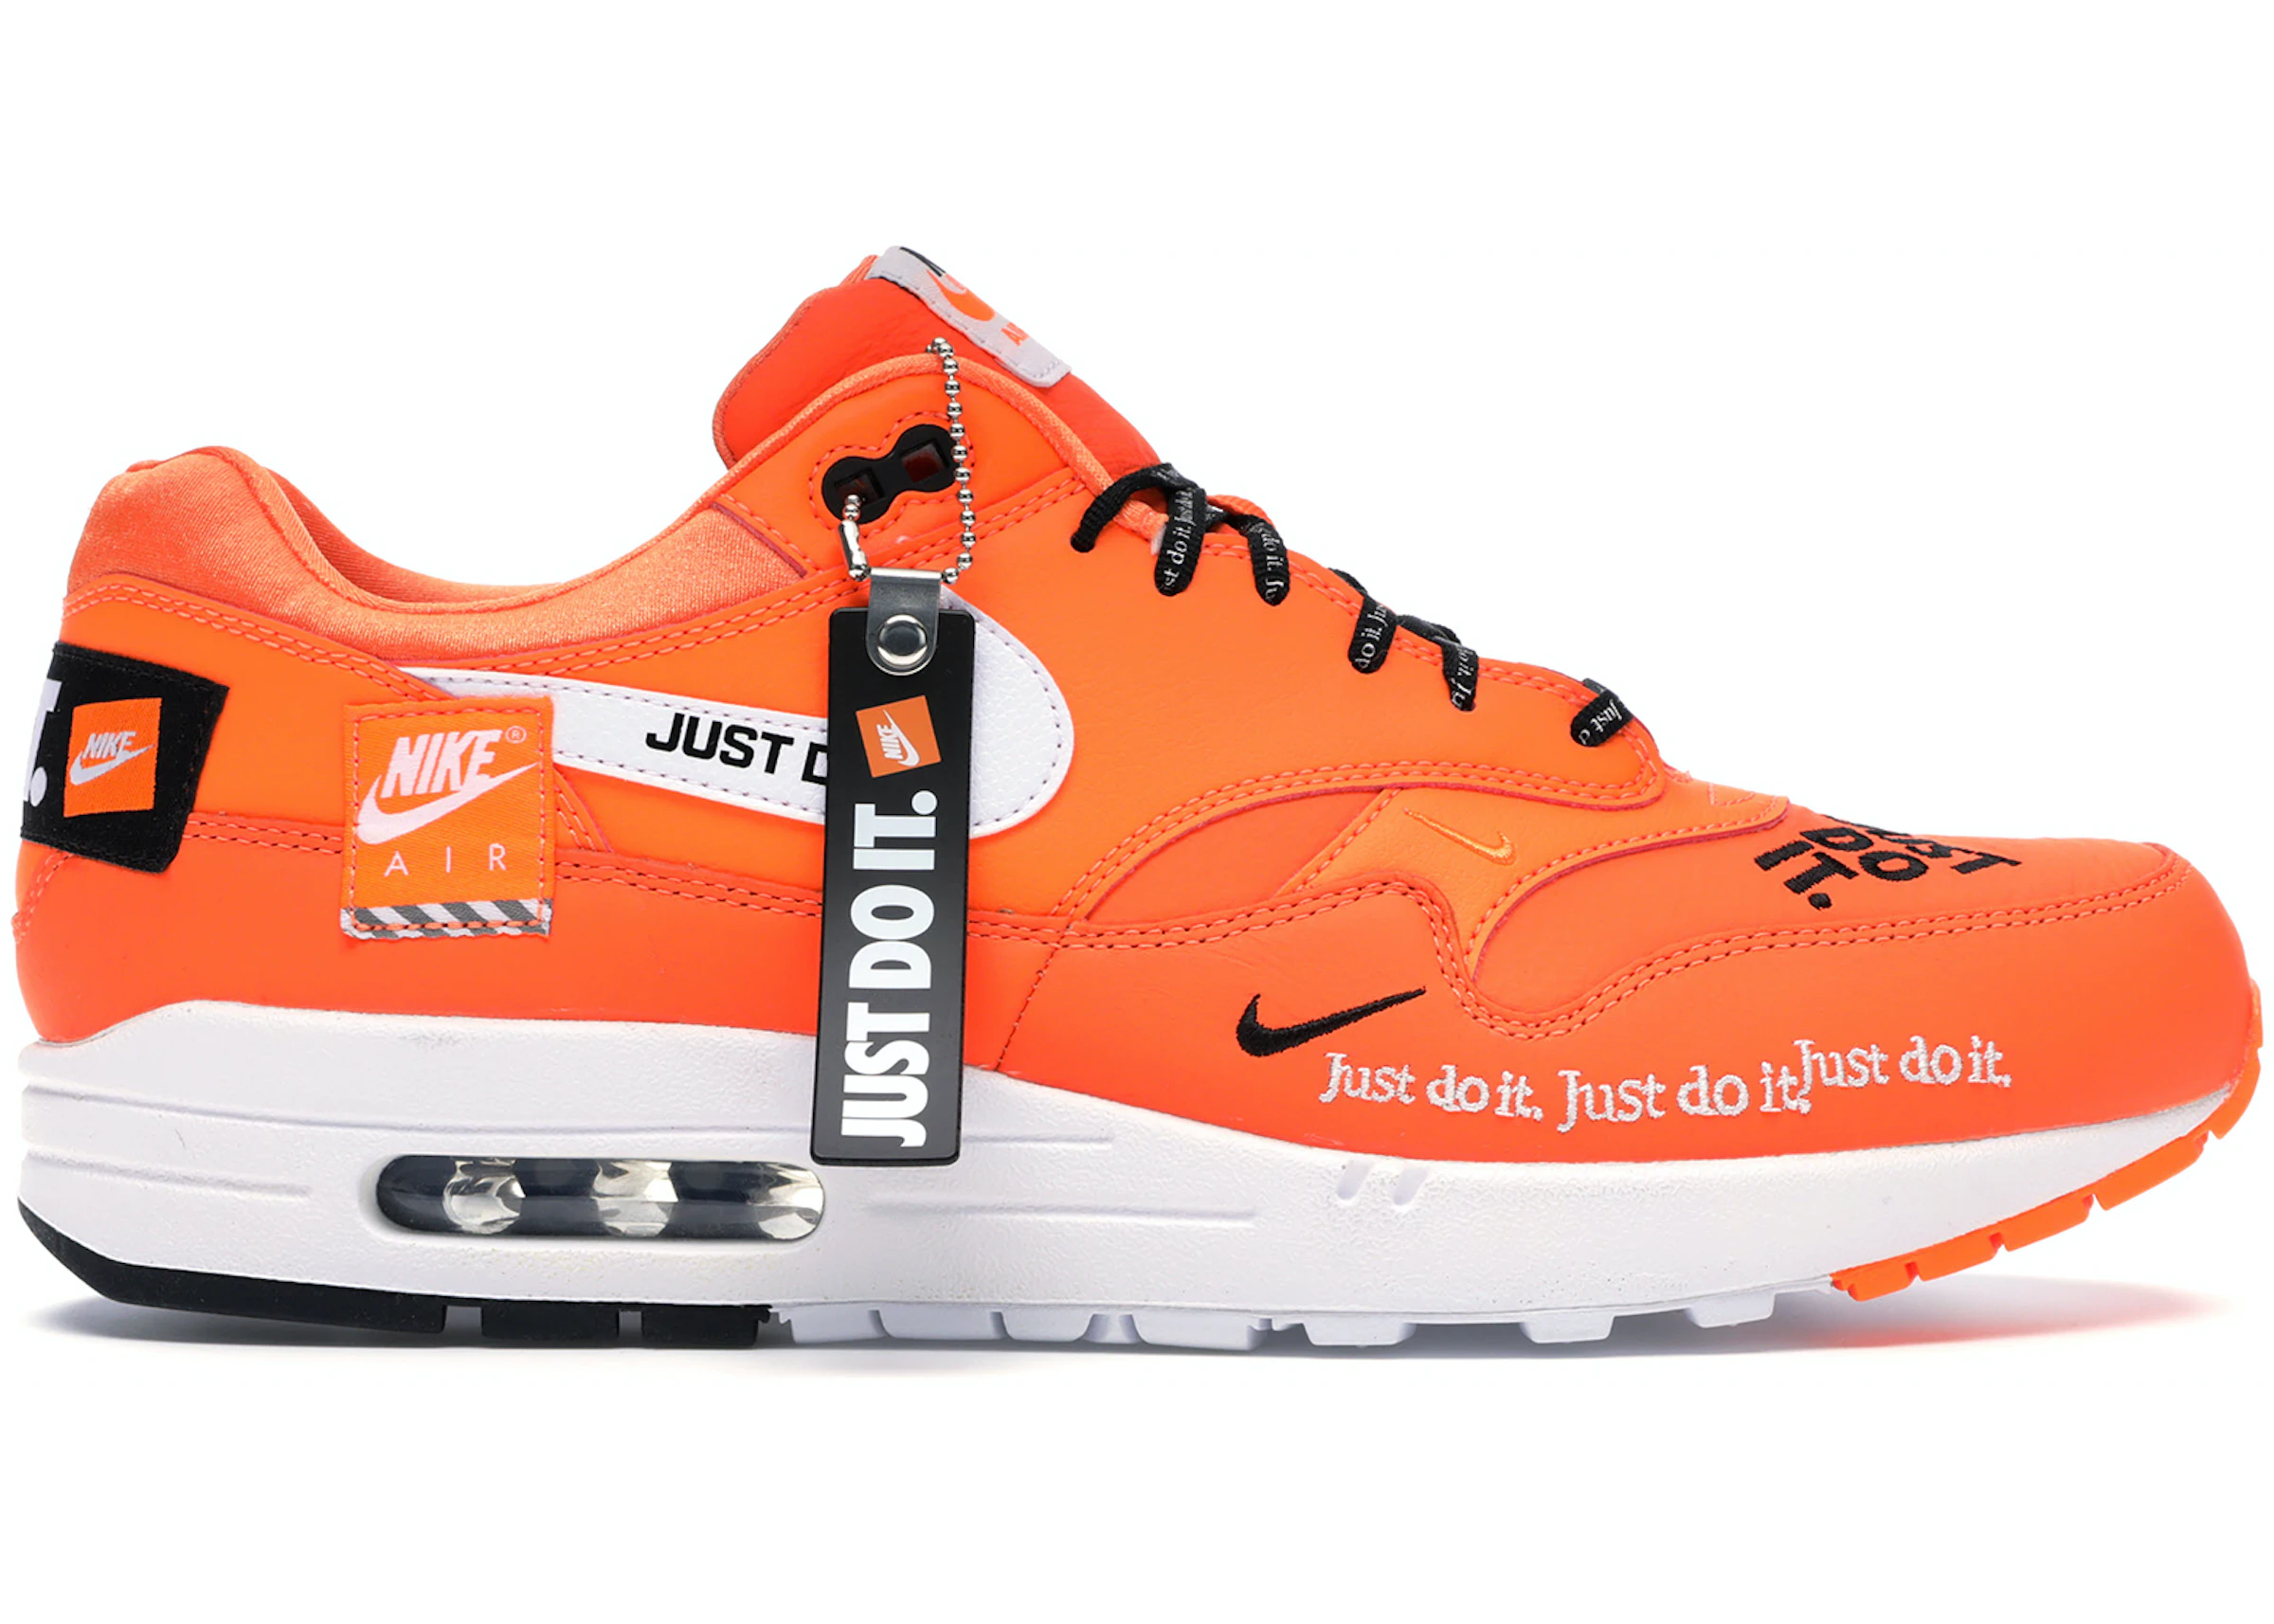 princess Invalid Rooster Nike Air Max 1 Just Do It Pack Orange - AO1021-800 - US